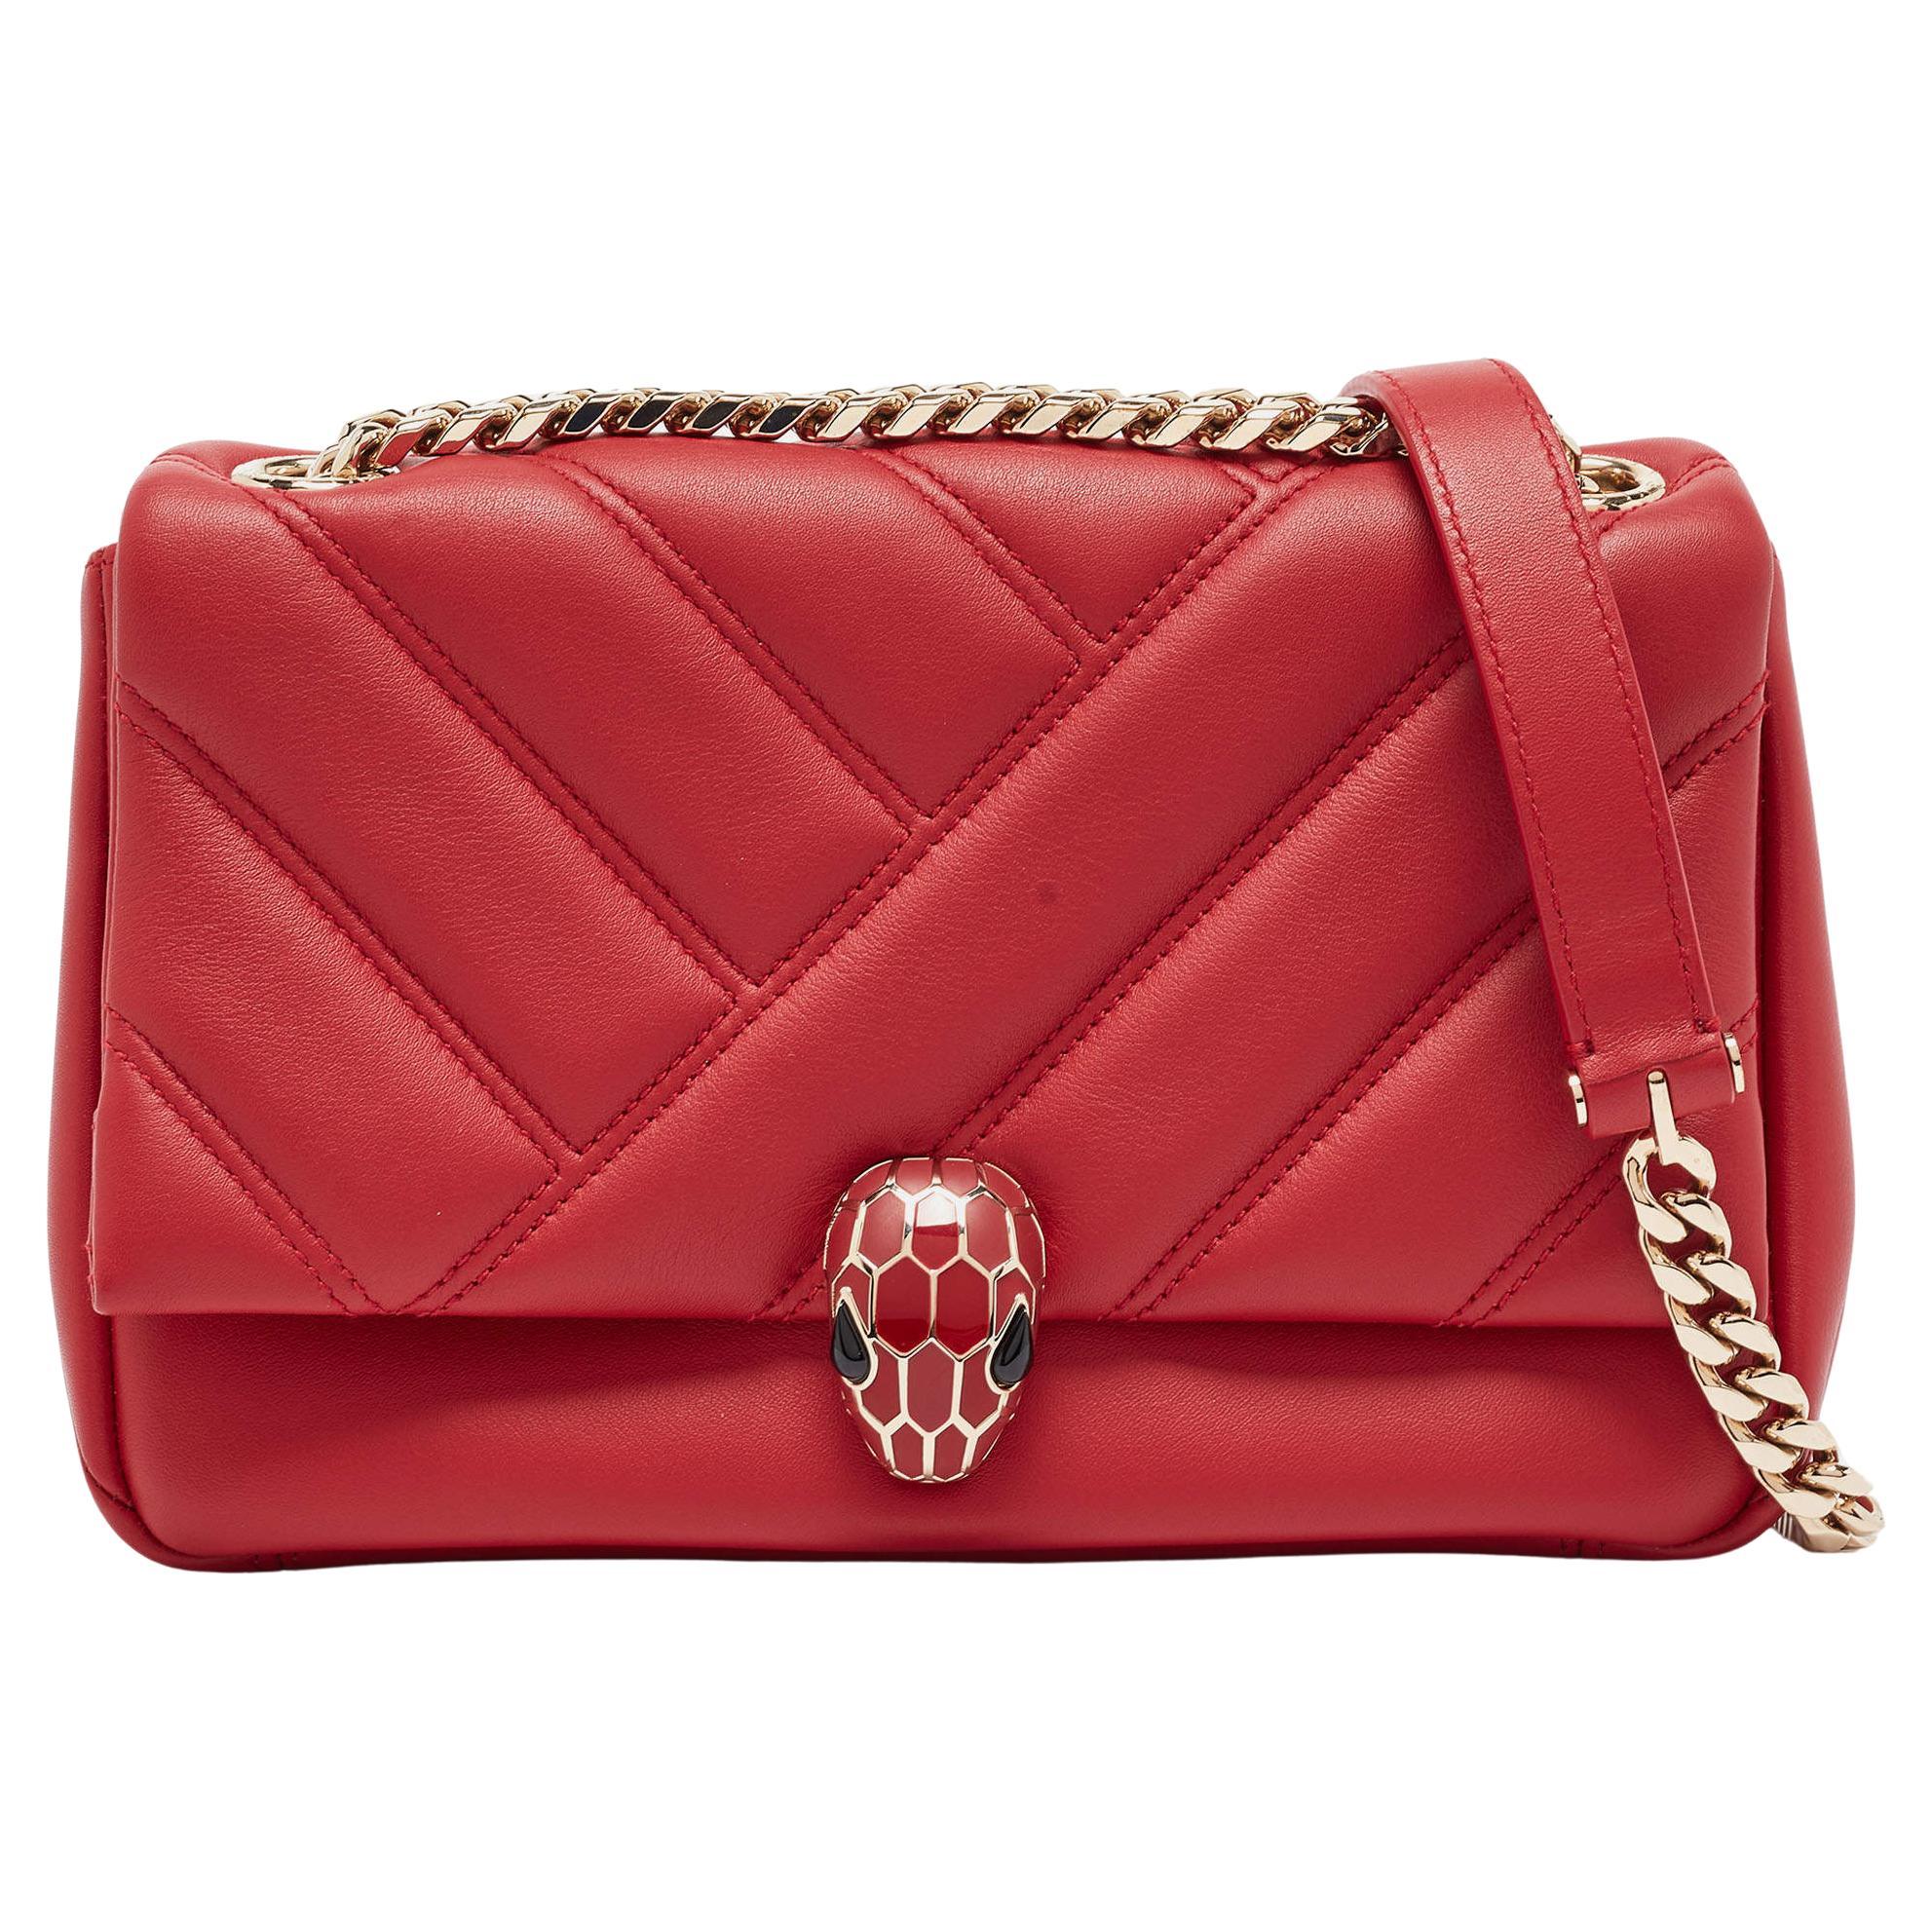 Bvlgari Red Quilted Leather Small Serpenti Cabochon Shoulder Bag